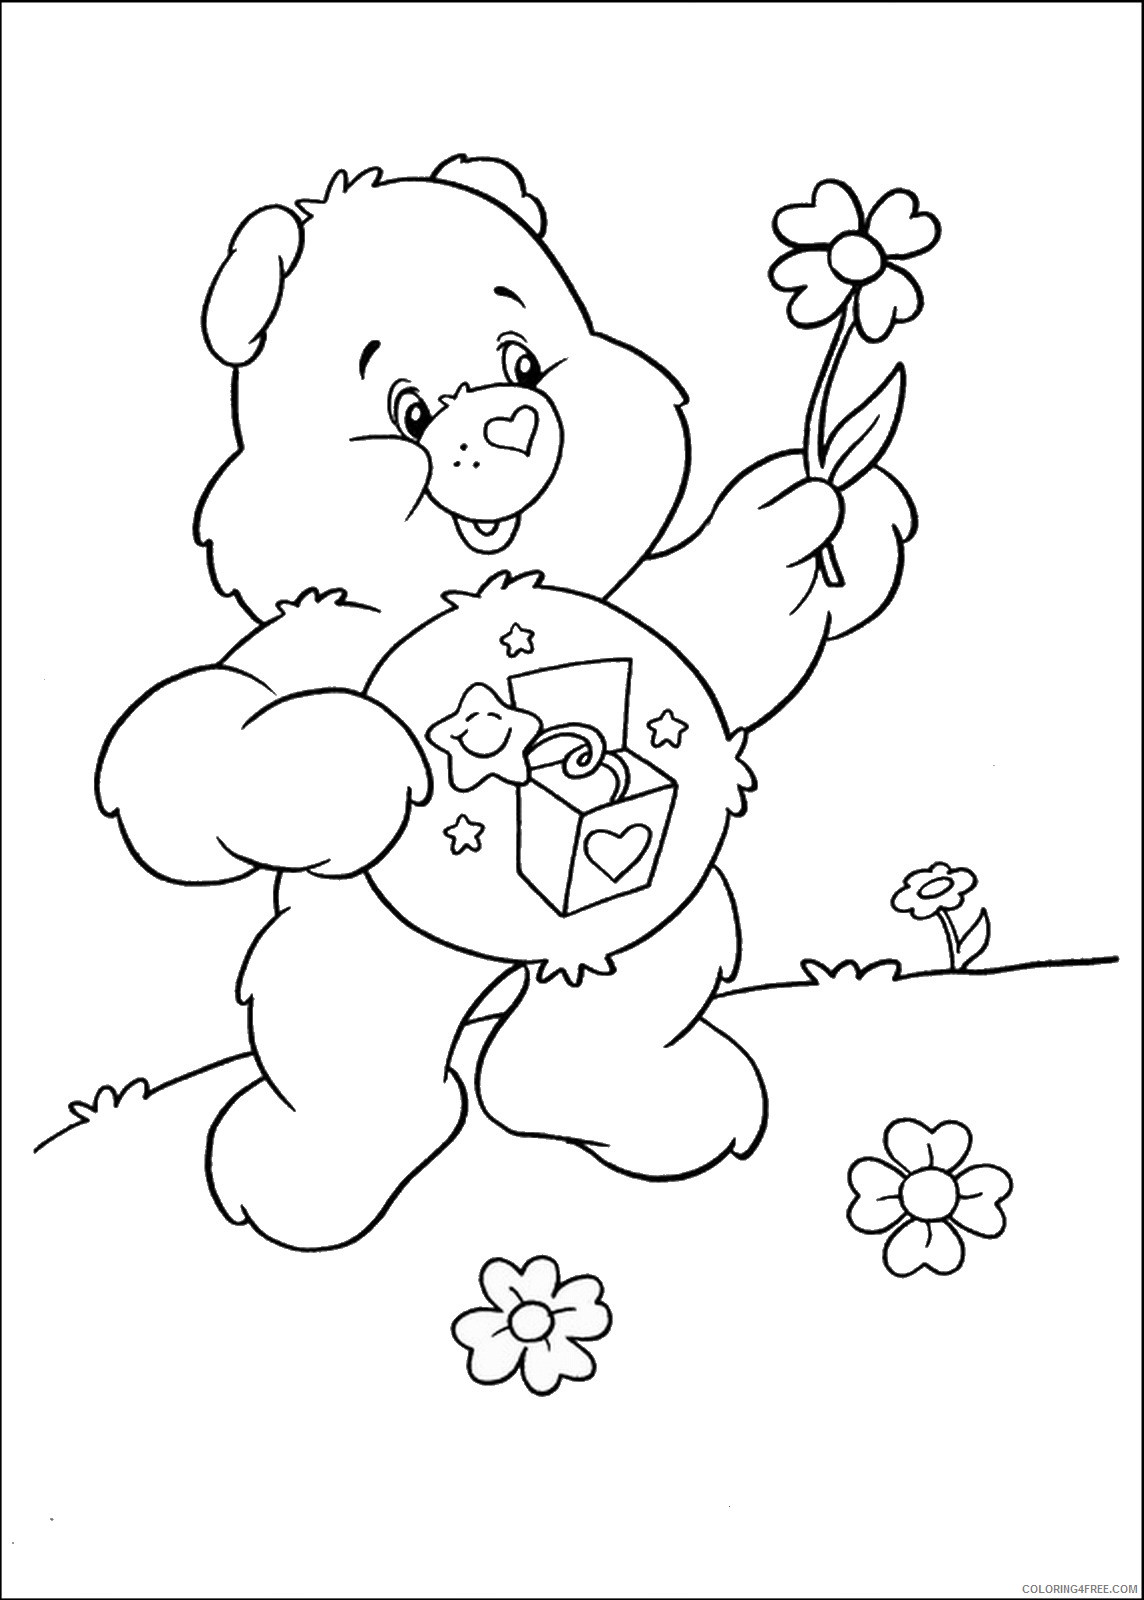 Care Bears Coloring Pages Cartoons care_bears_cl_20 Printable 2020 1556 Coloring4free